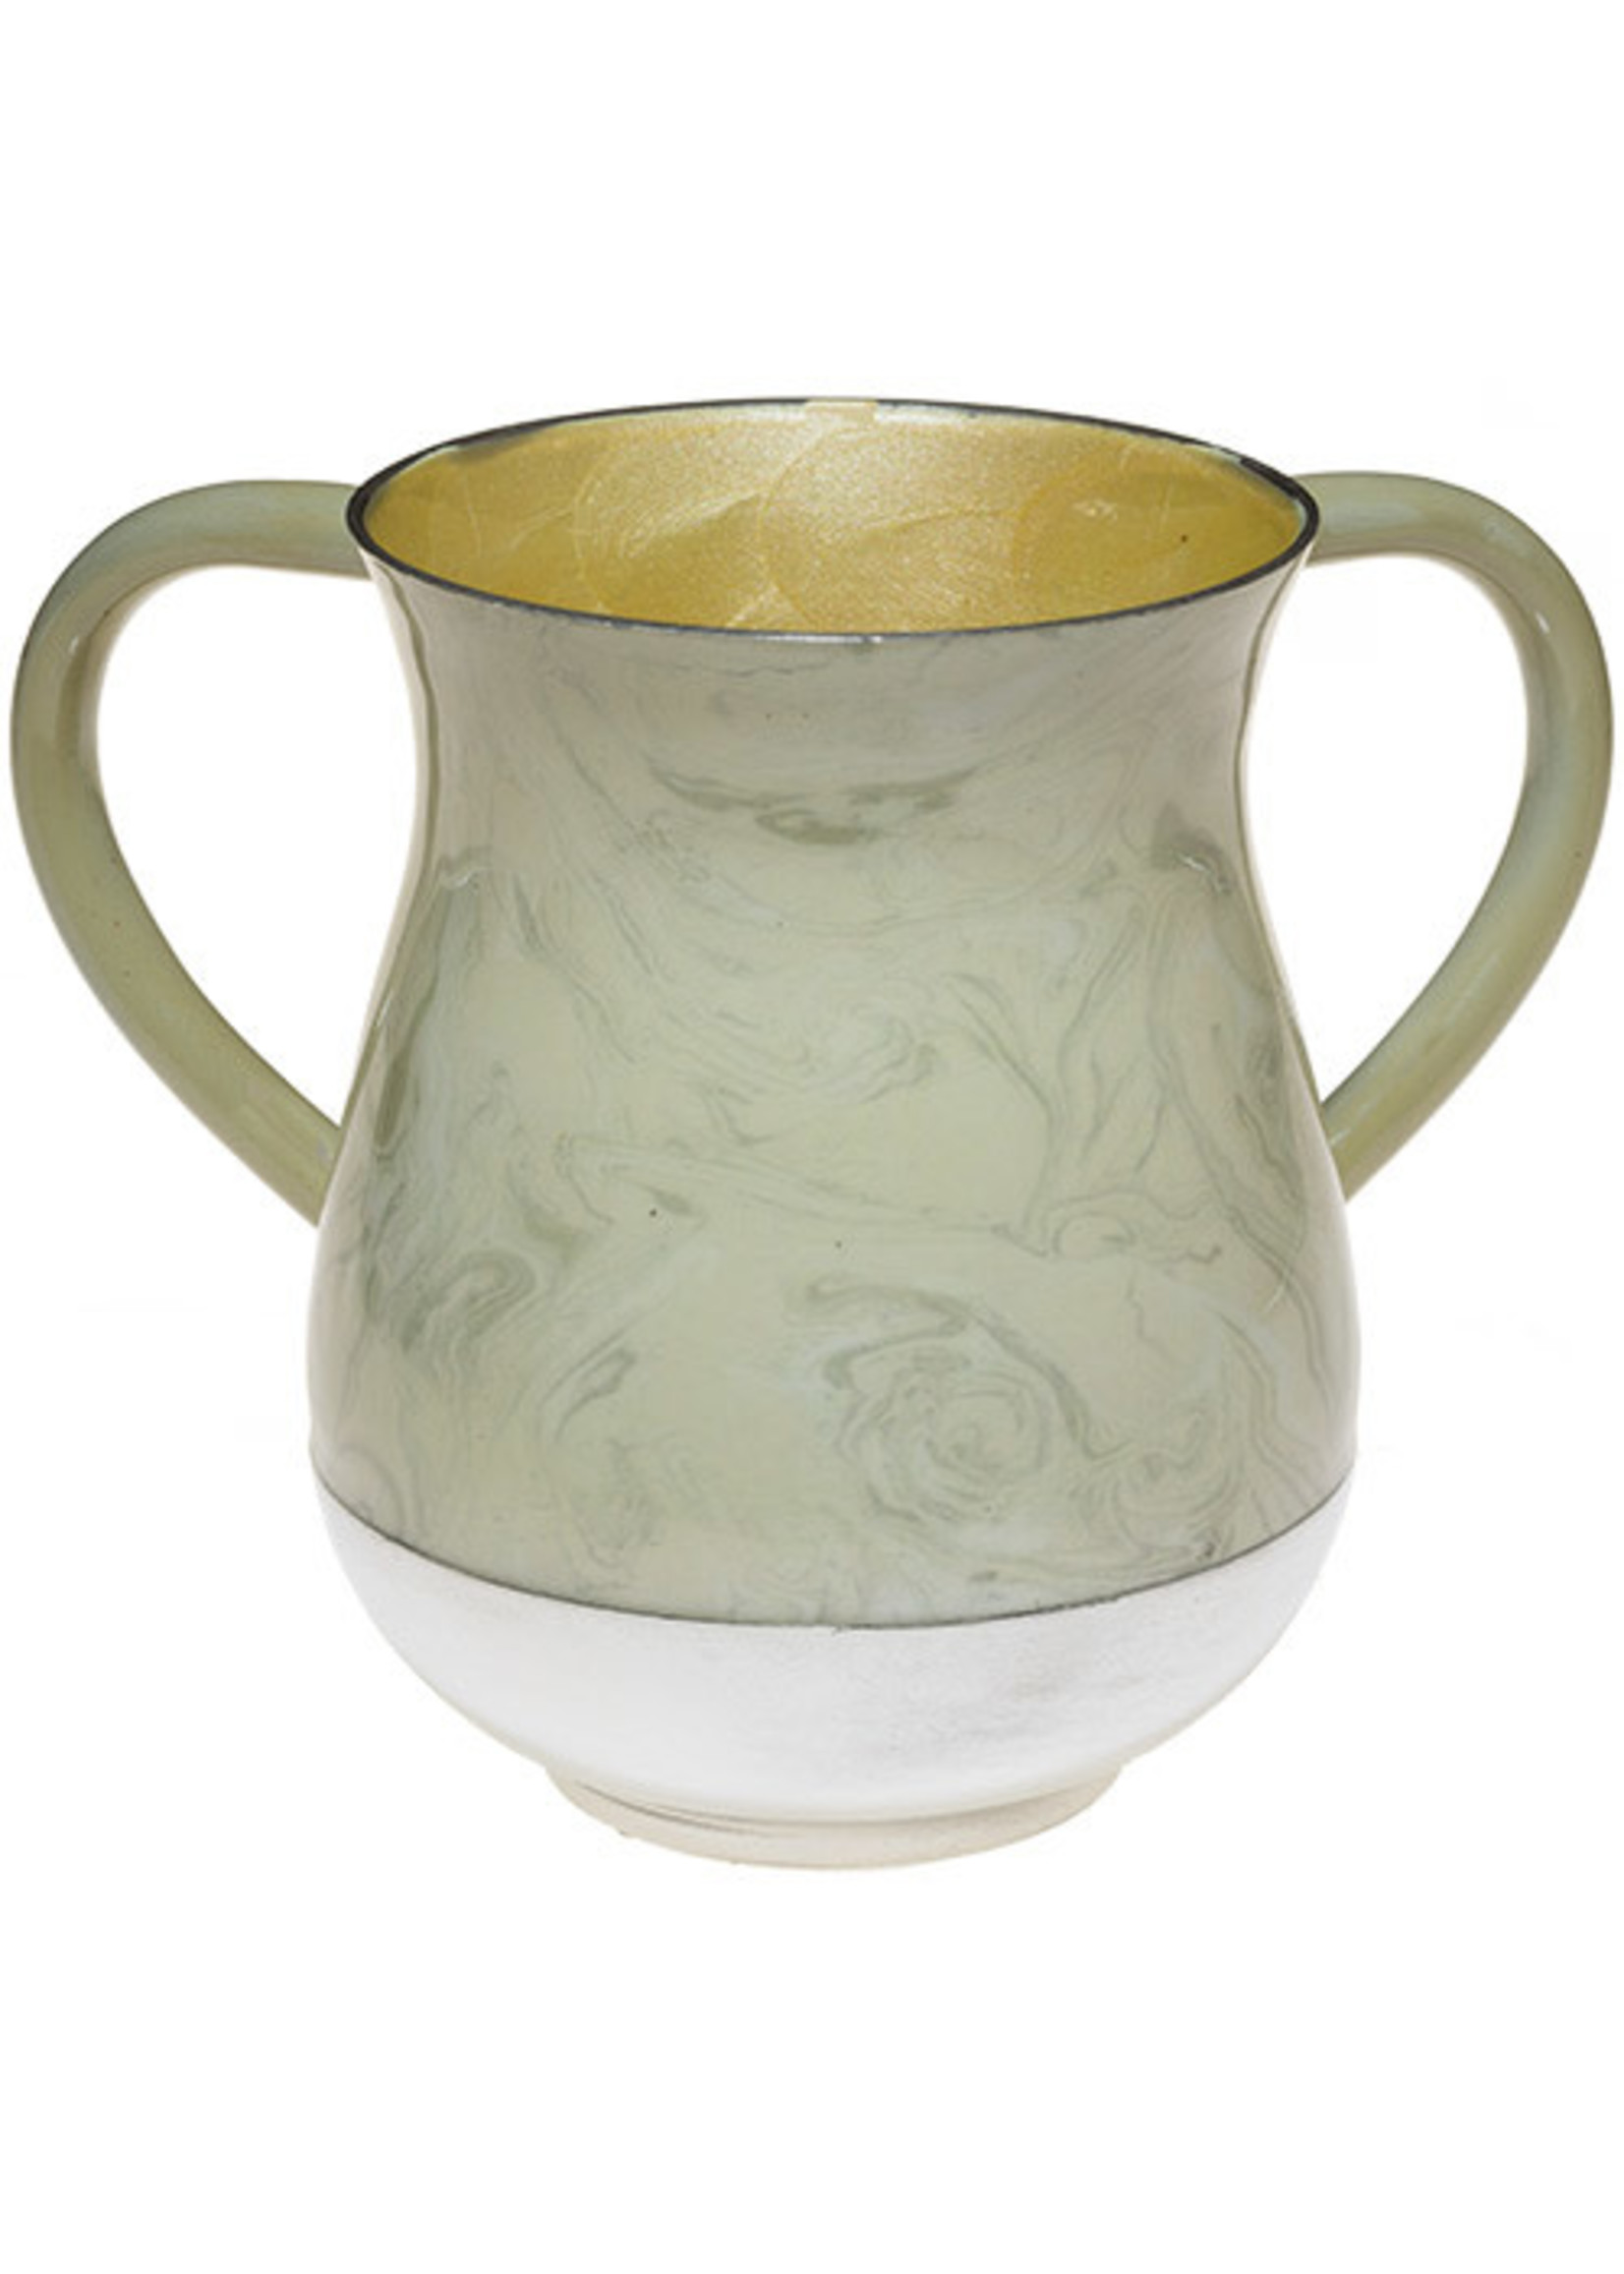 WASHING CUP MARBLE LOOK CREAM